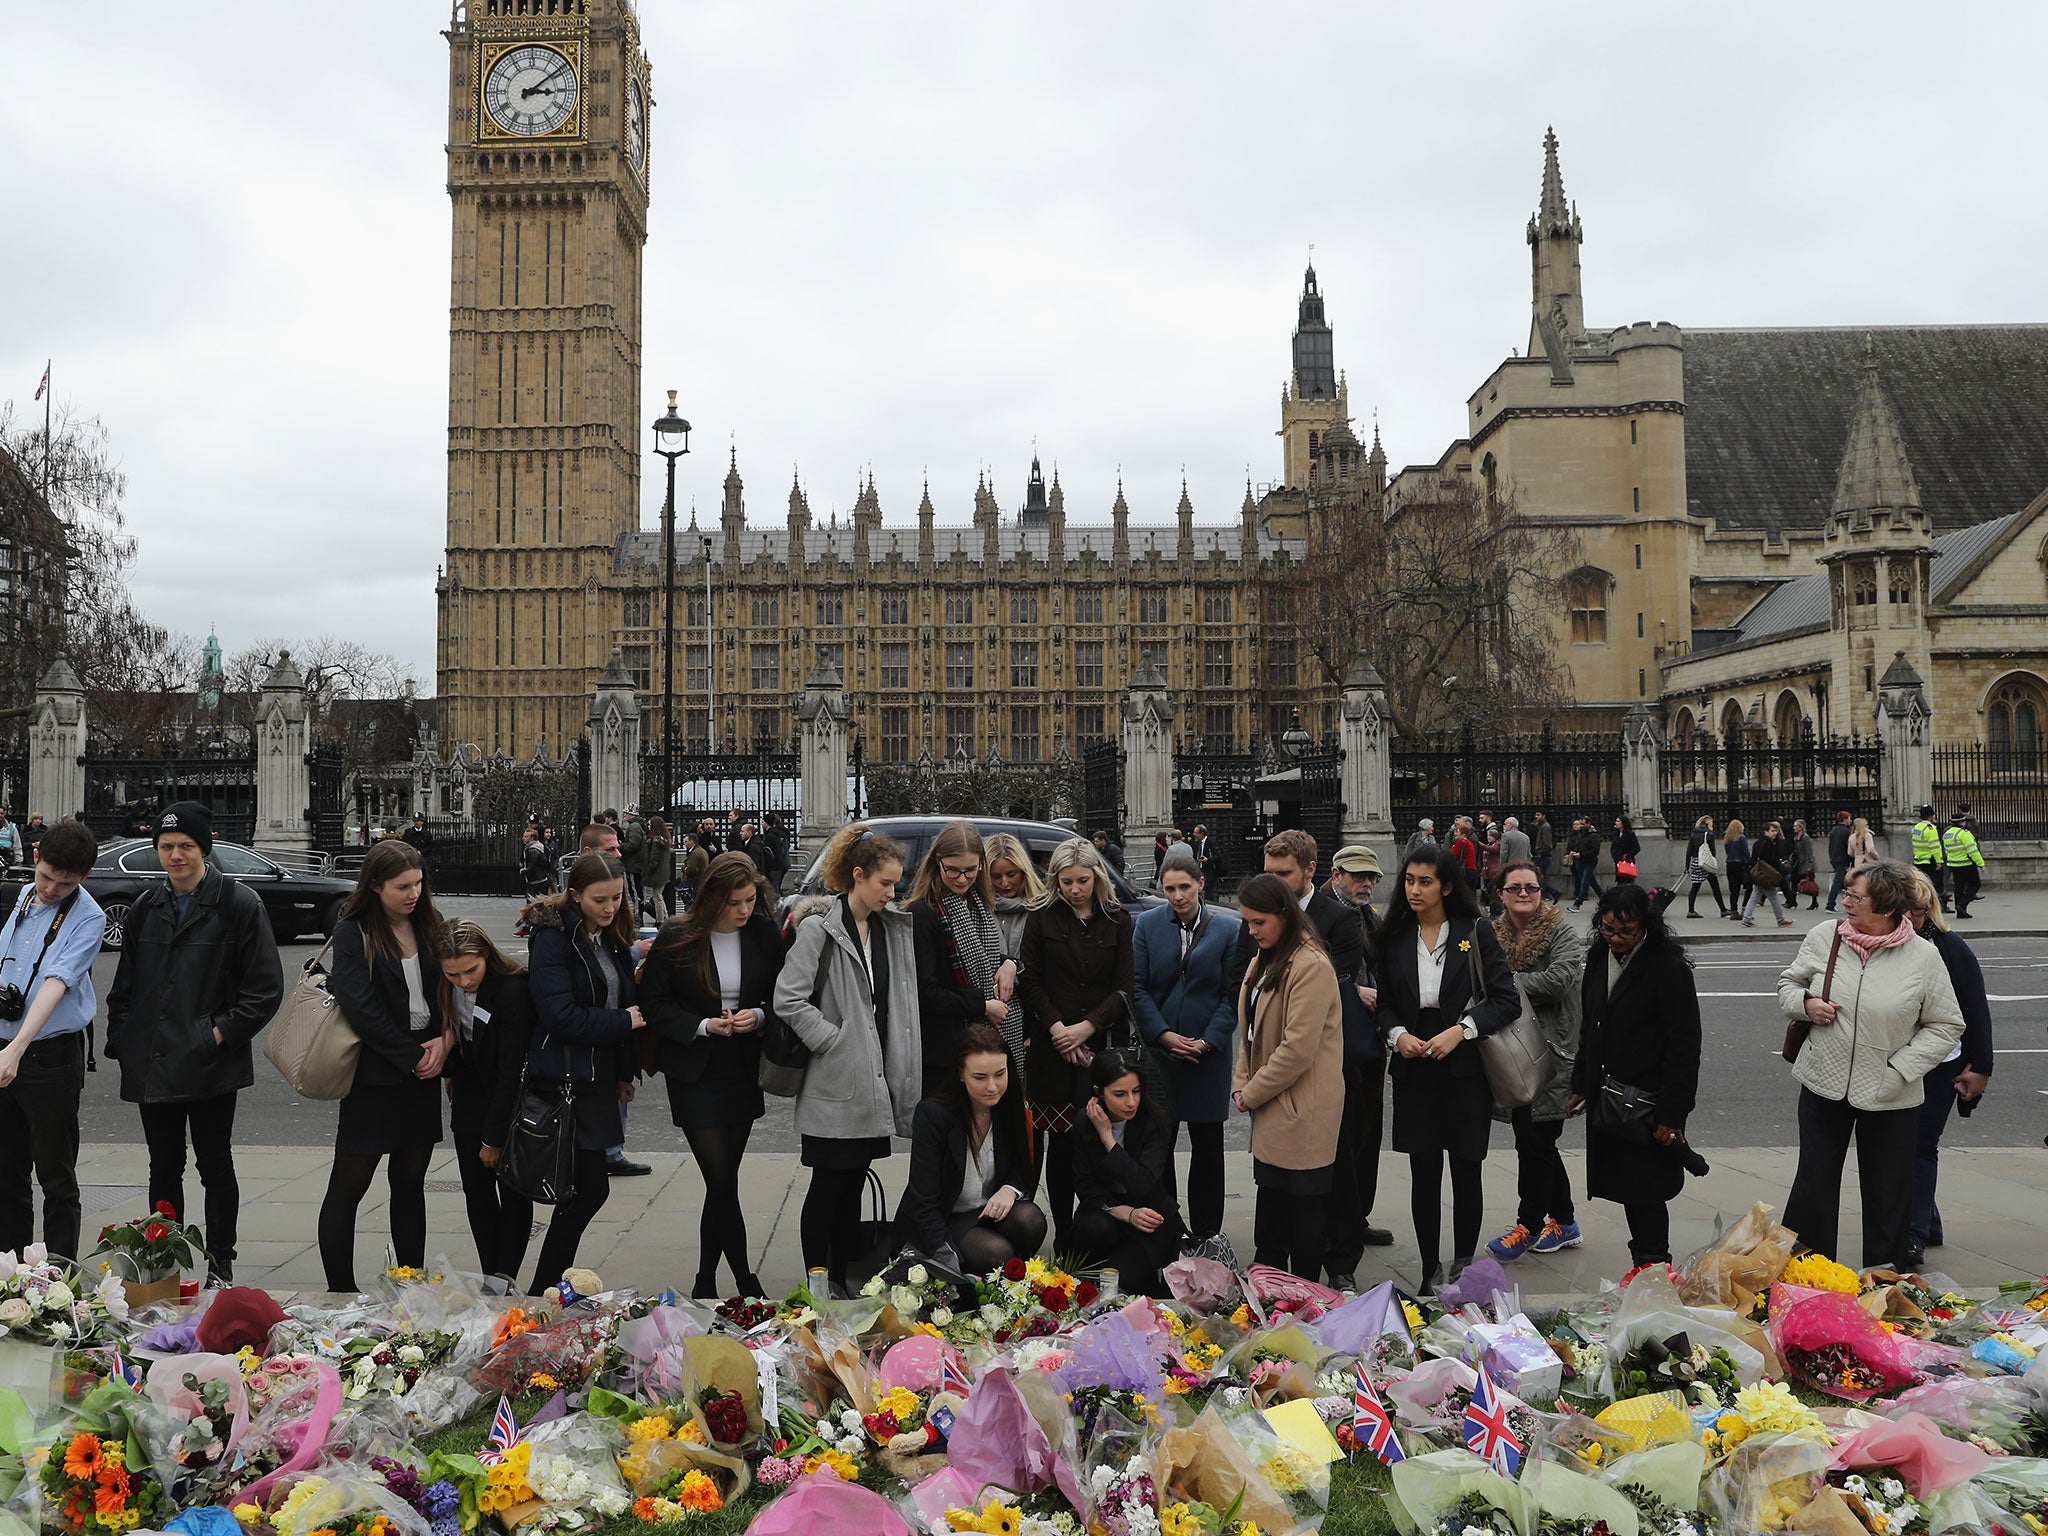 Floral tributes left for the victims of the Westminster terrorist attack